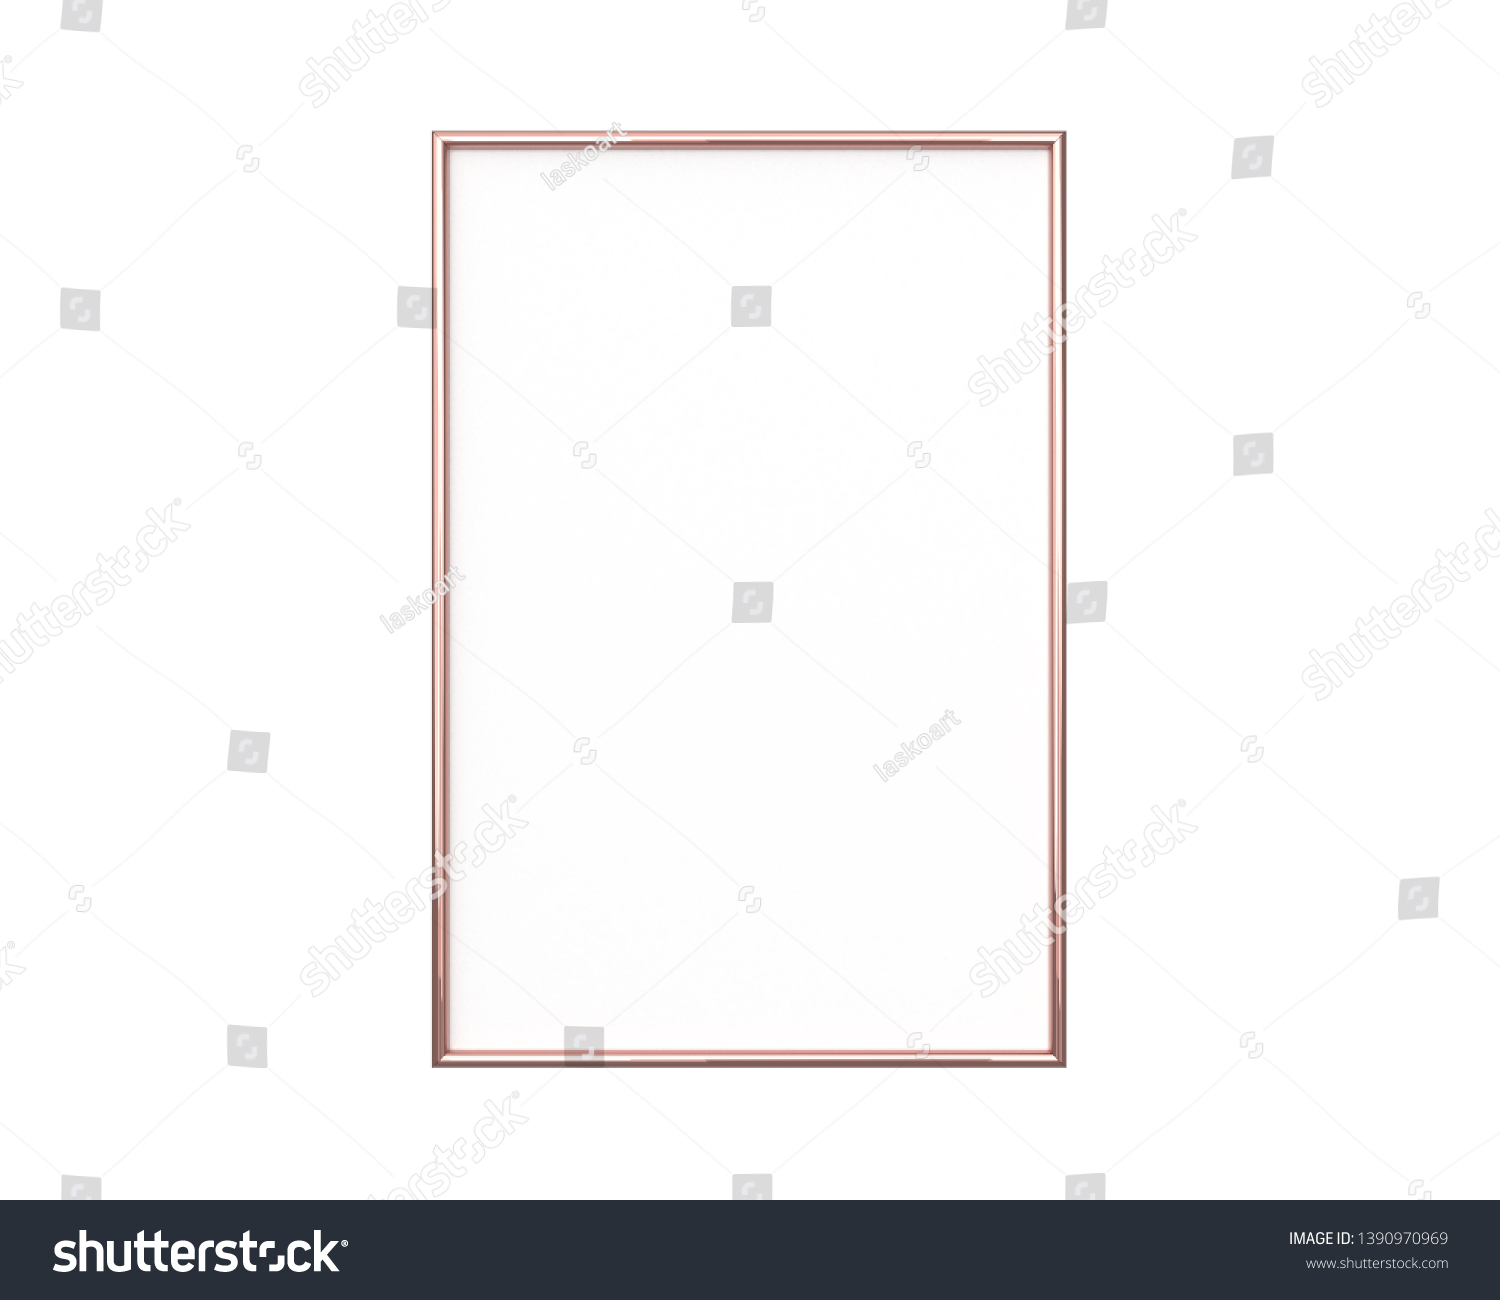 Rose gold frame mockup on a white background. 2x3 ratio Vertical  #1390970969